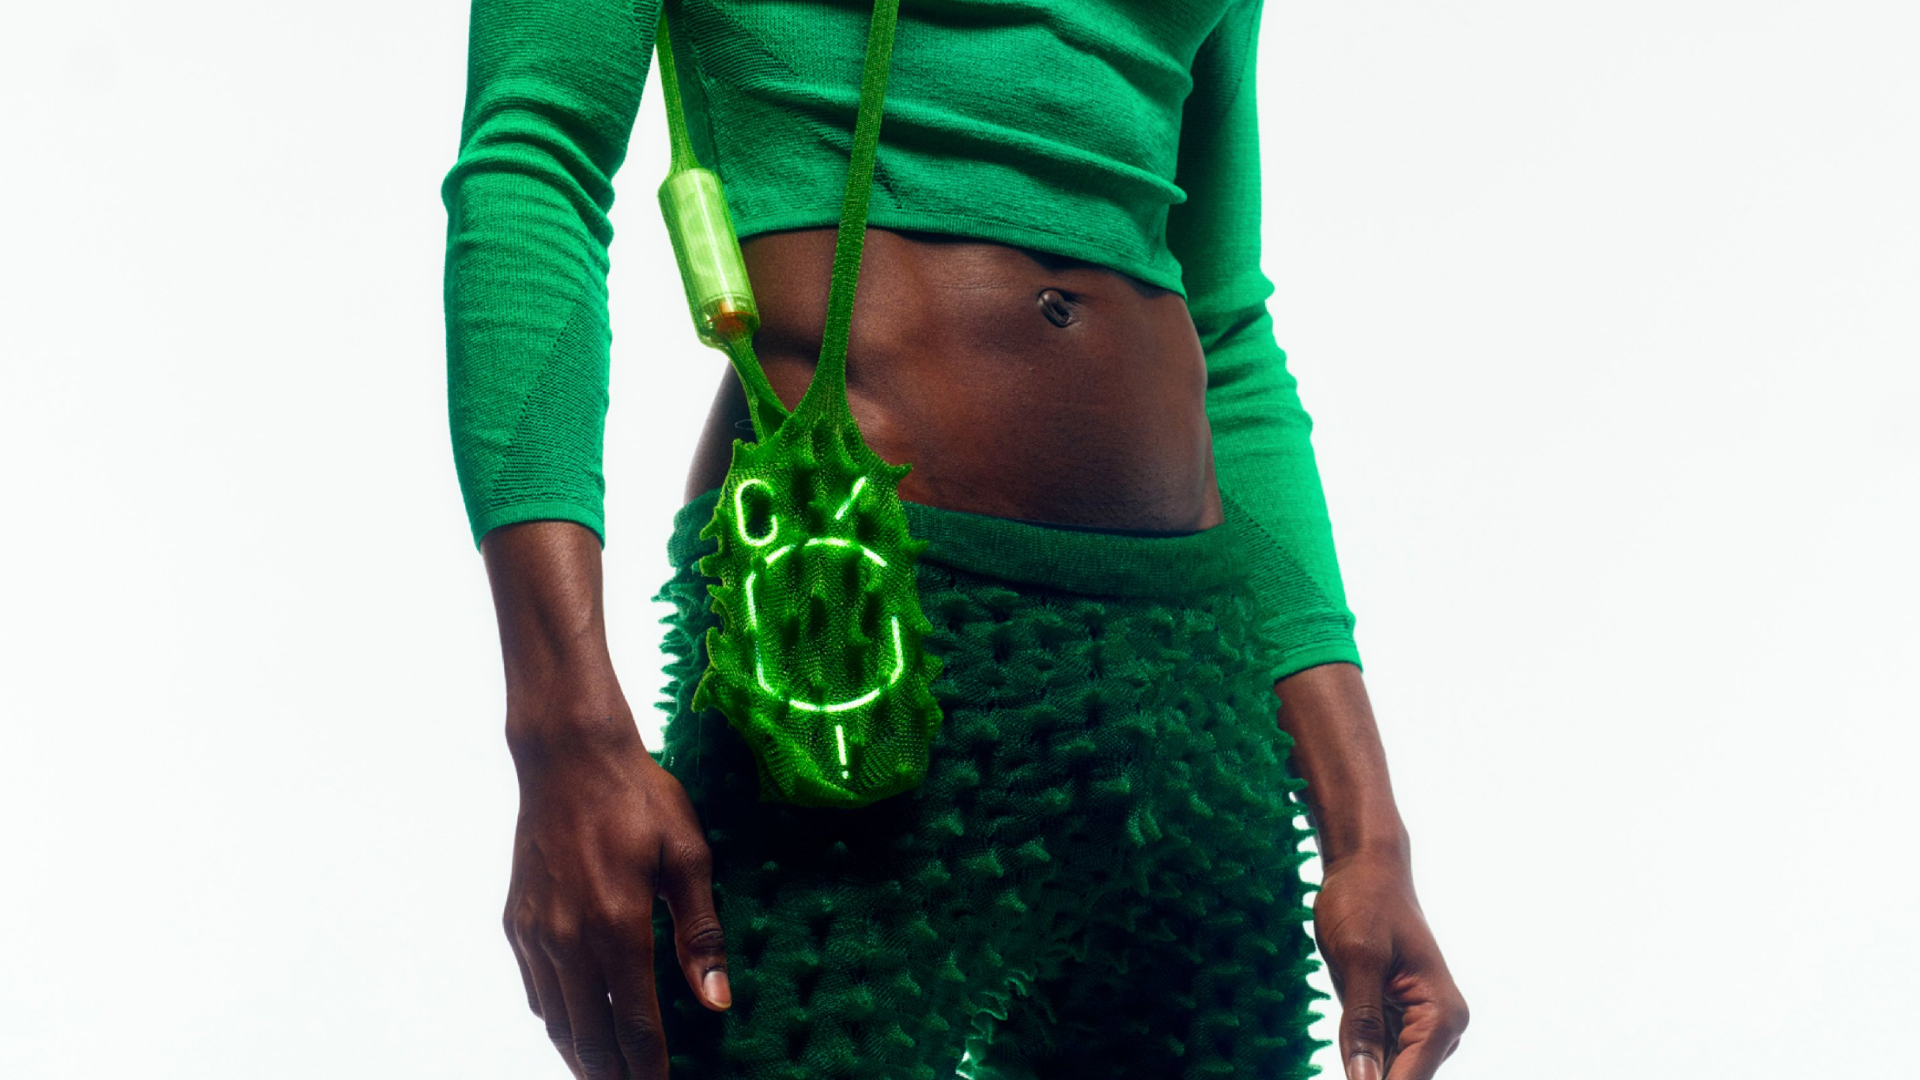 Nothing Ear (stick) worn inside a green bag, slung across the shoulder of a model, on white background